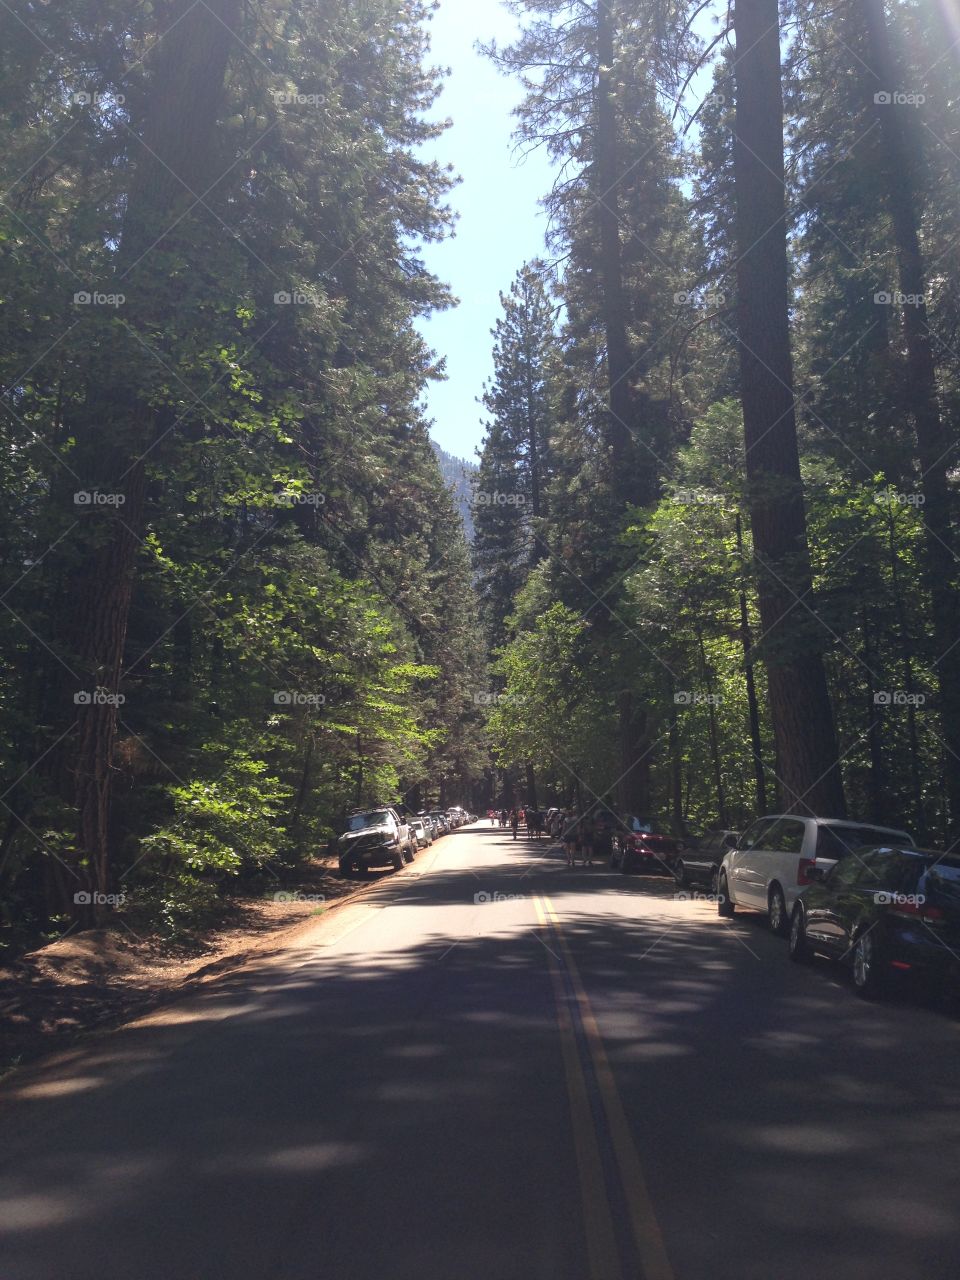 National Park, Road, California, Forest